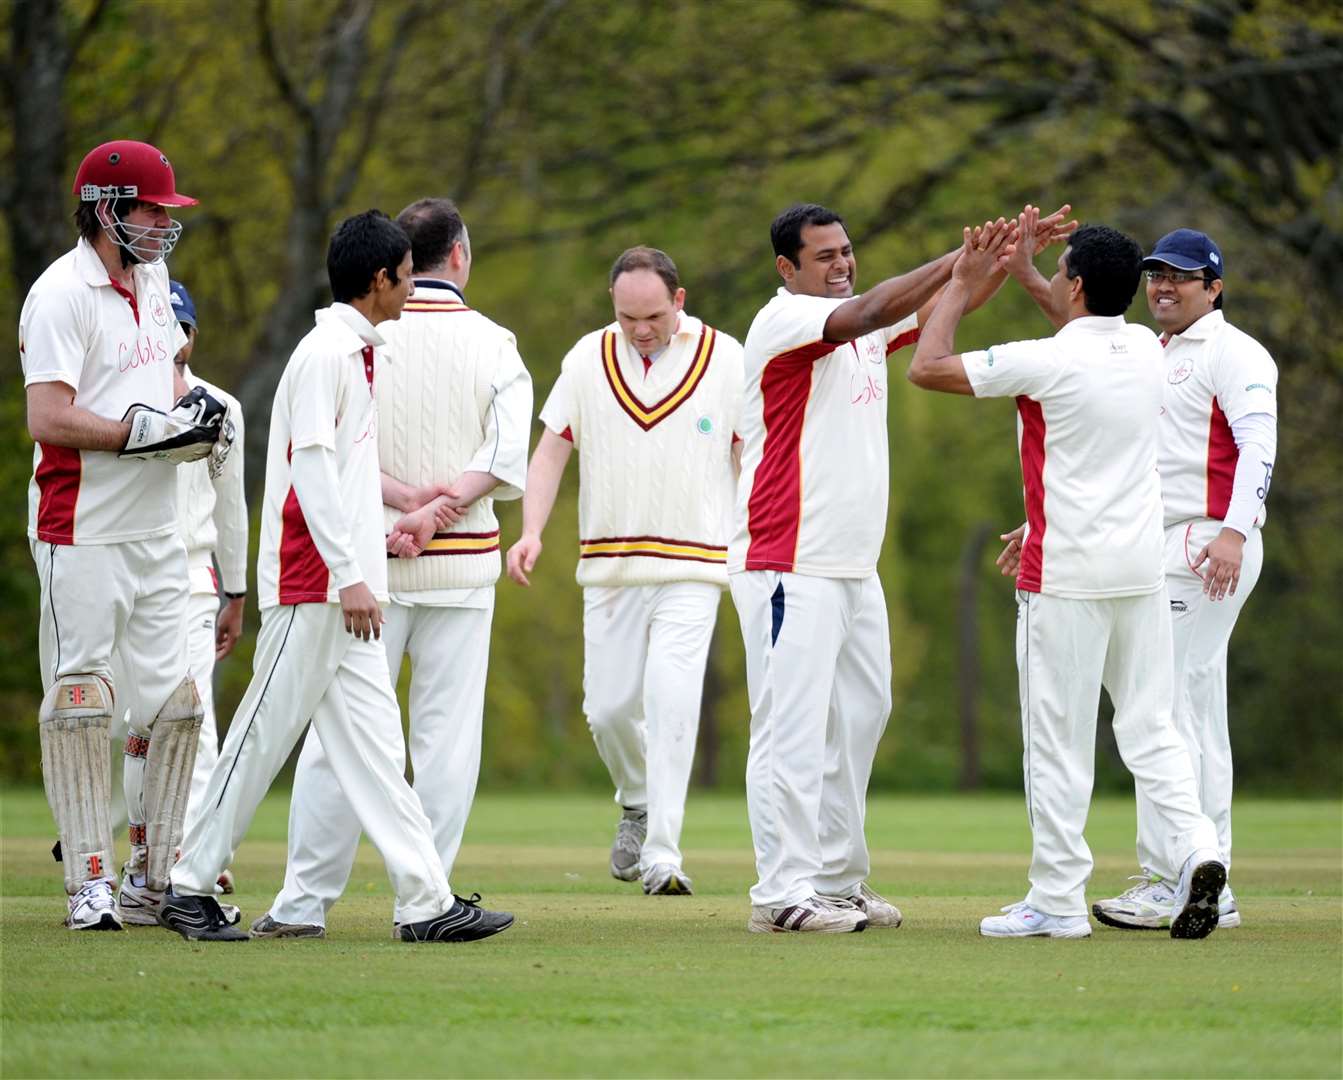 John Paul celebrates taking a wicket for Highland Cricket Club. Picture: Gary Anthony